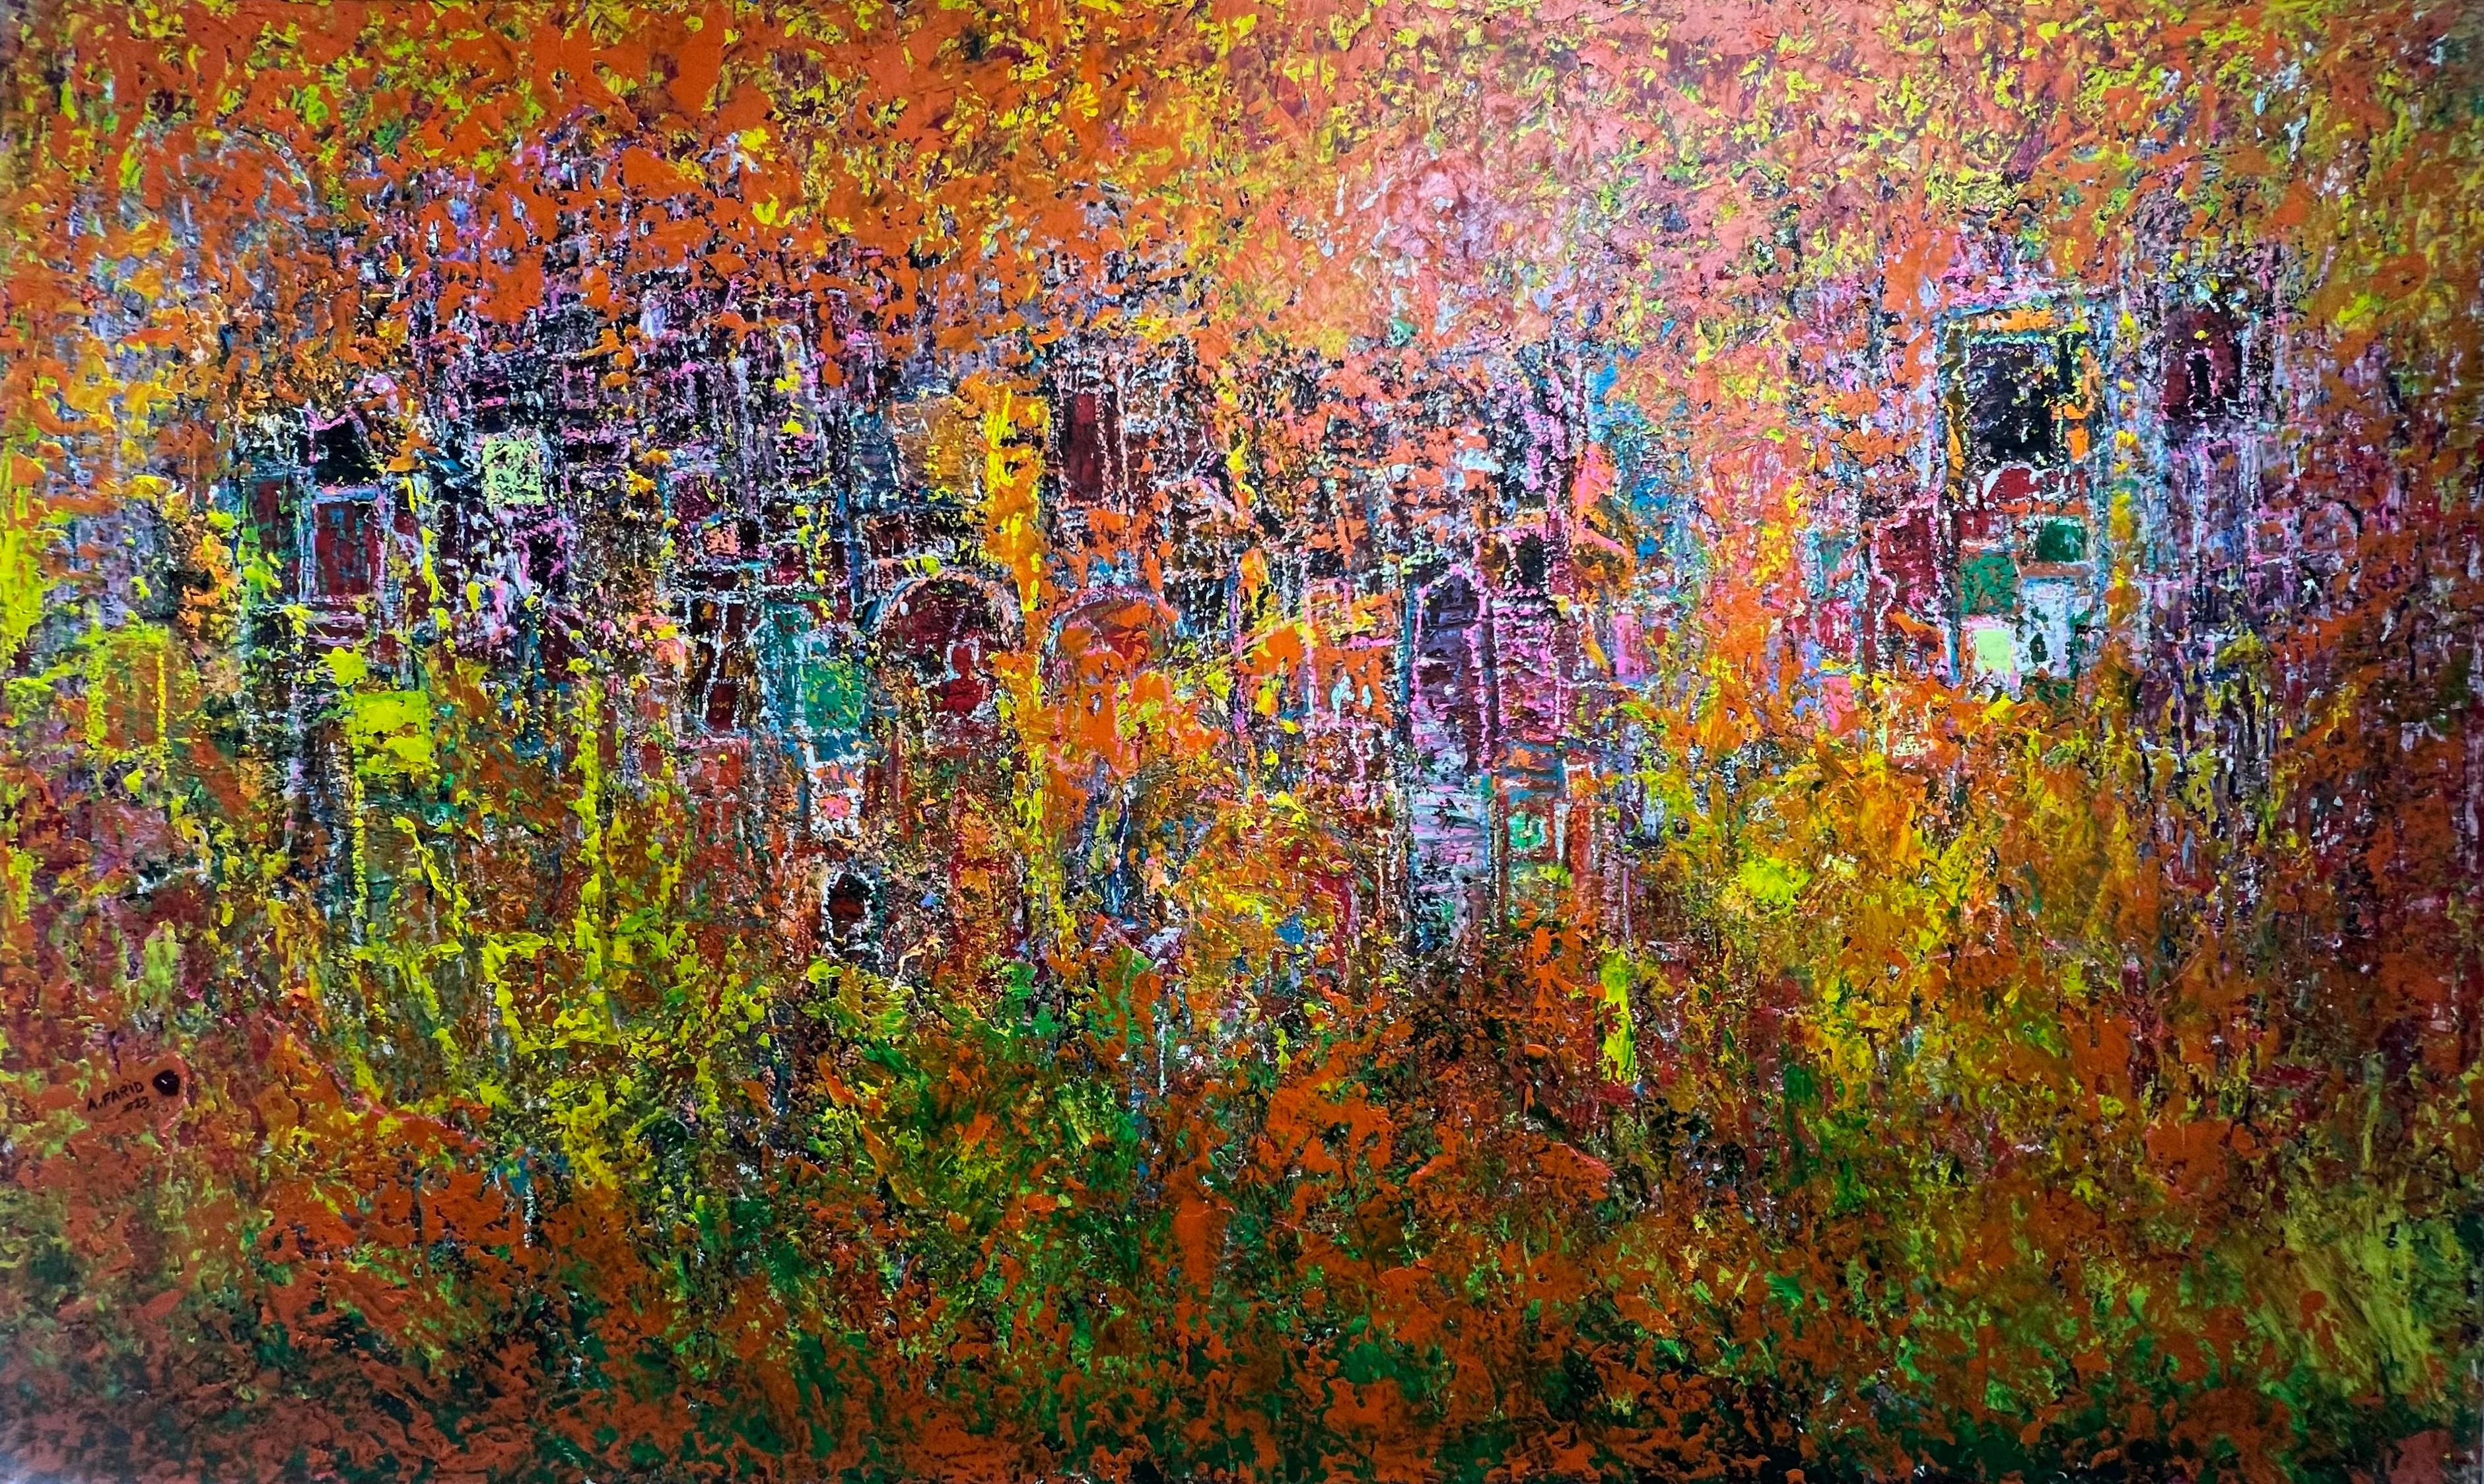 "Glory" Abstract Mixed Media Painting 47" x 79" inch by Ahmed Farid